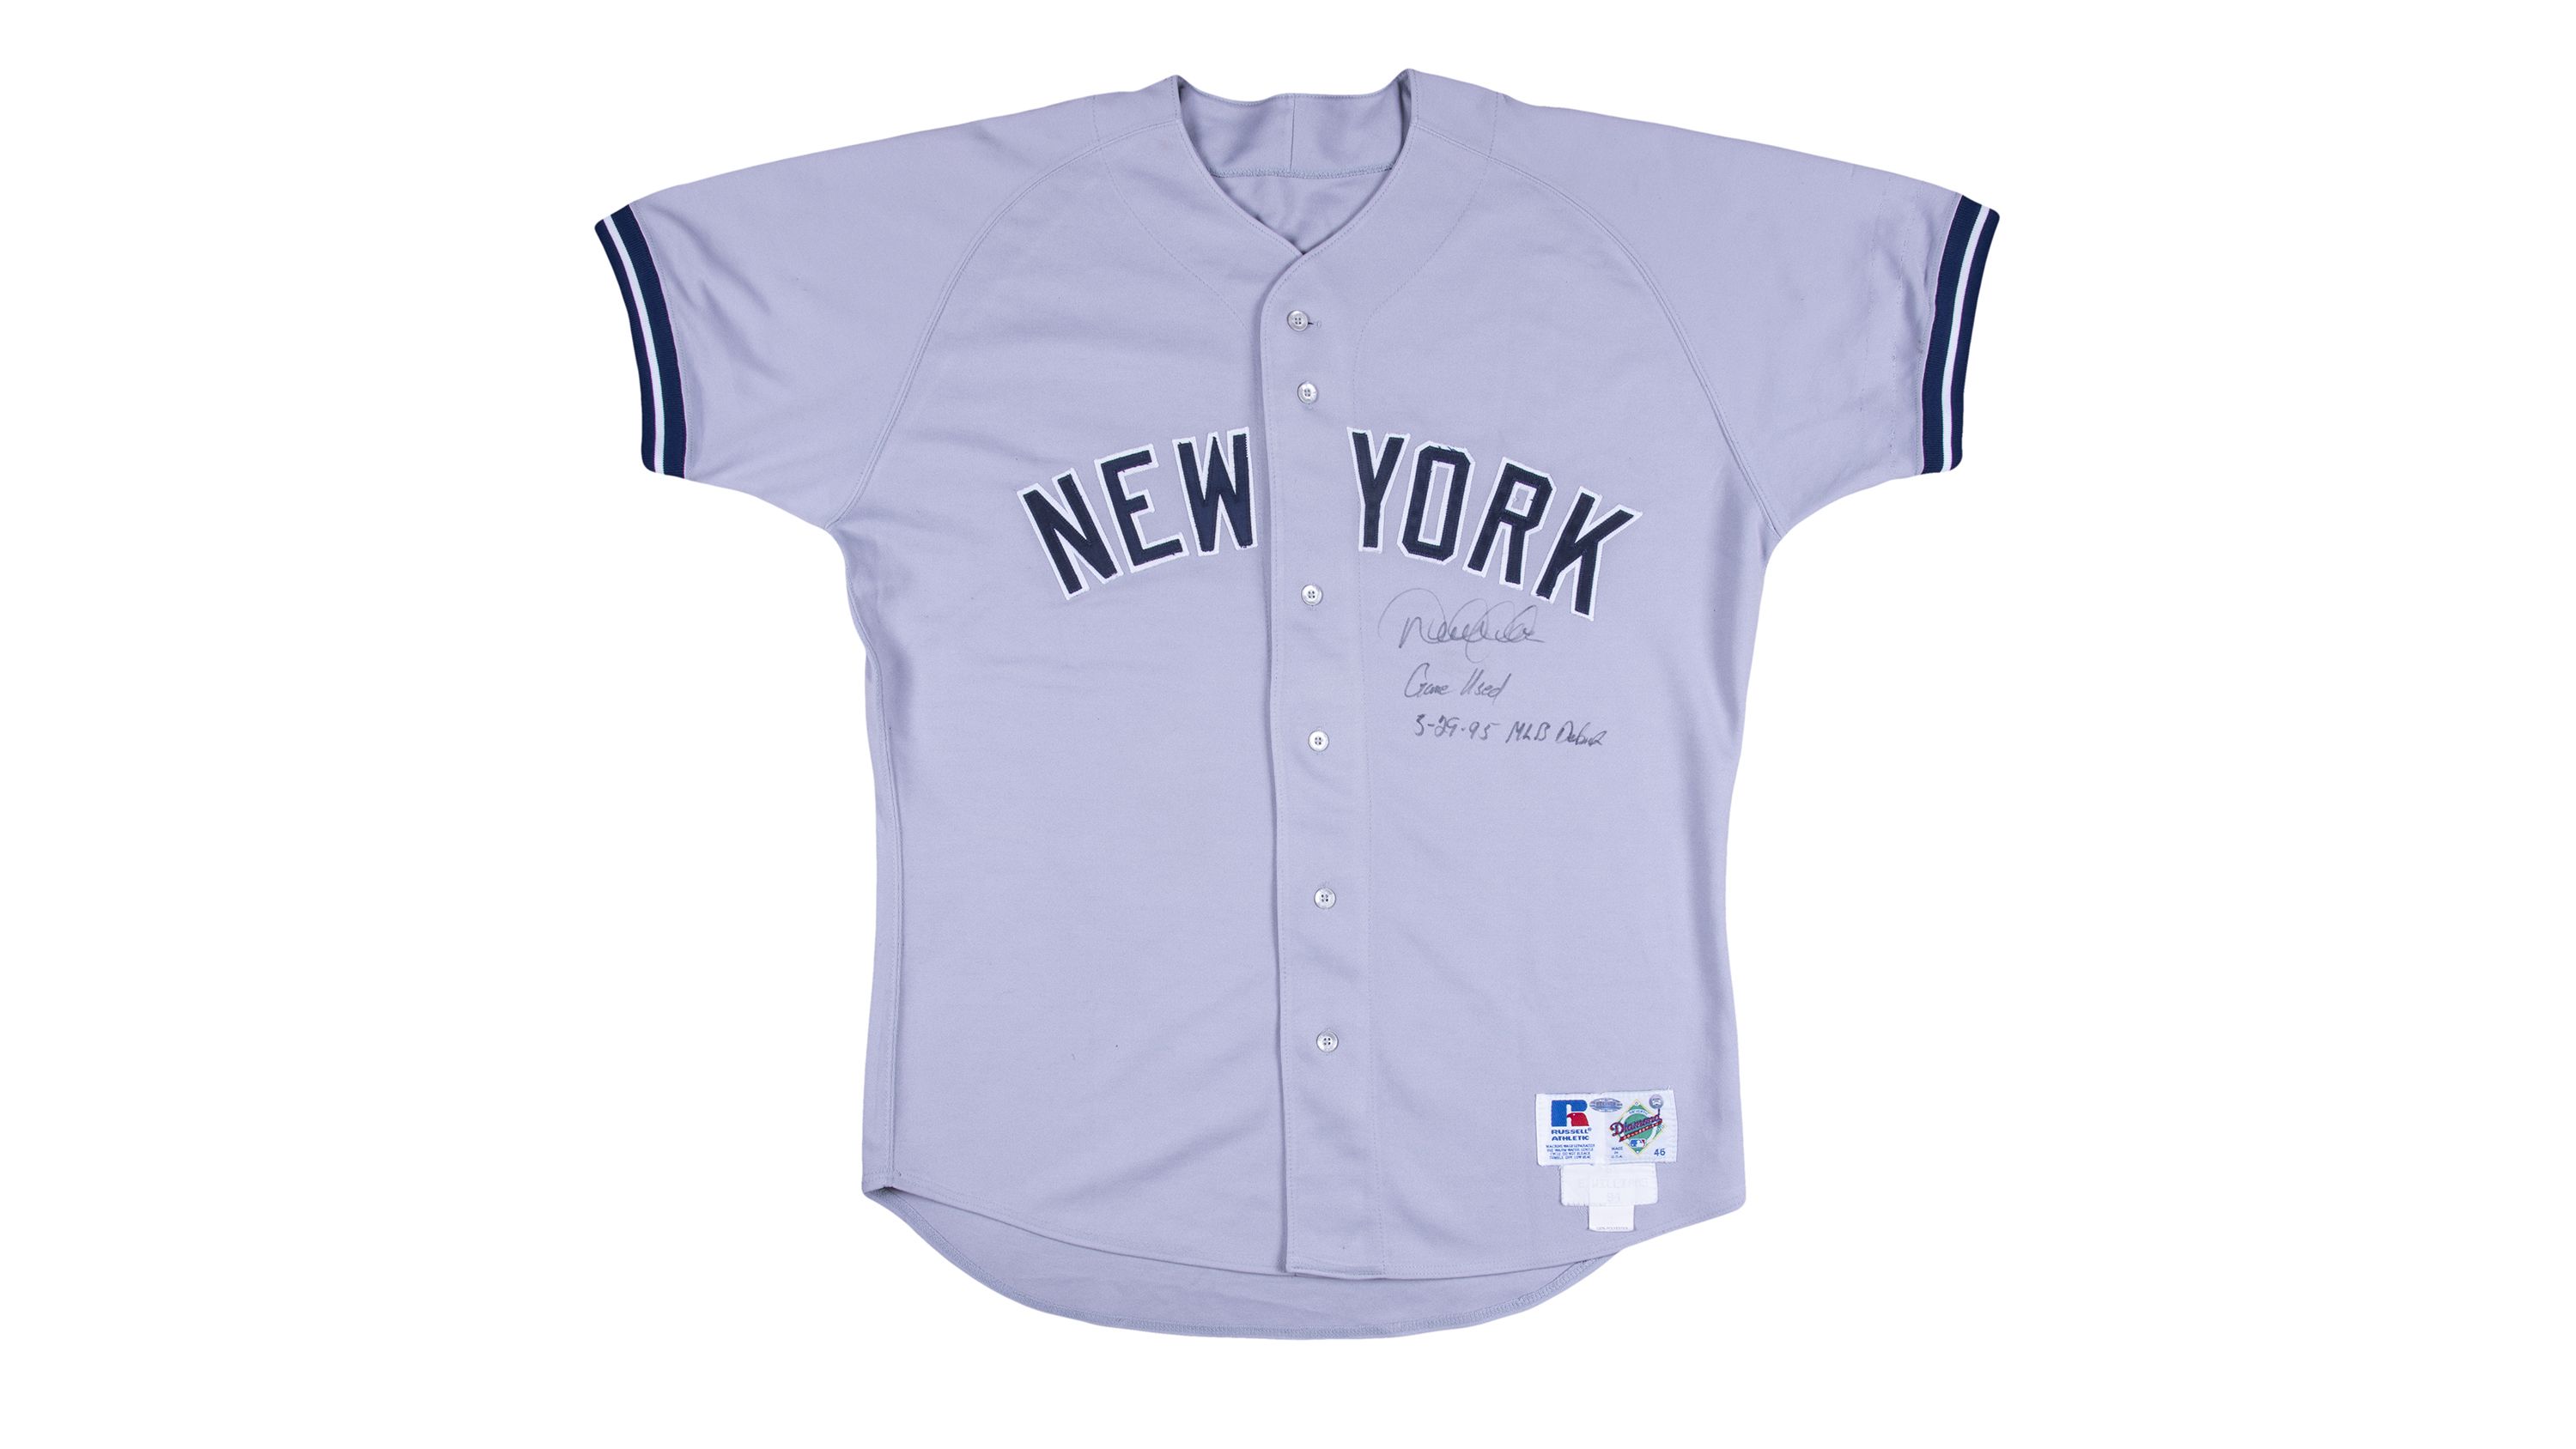 Derek Jeter's New York Yankees jersey the top-selling baseball jersey of  all time - ESPN